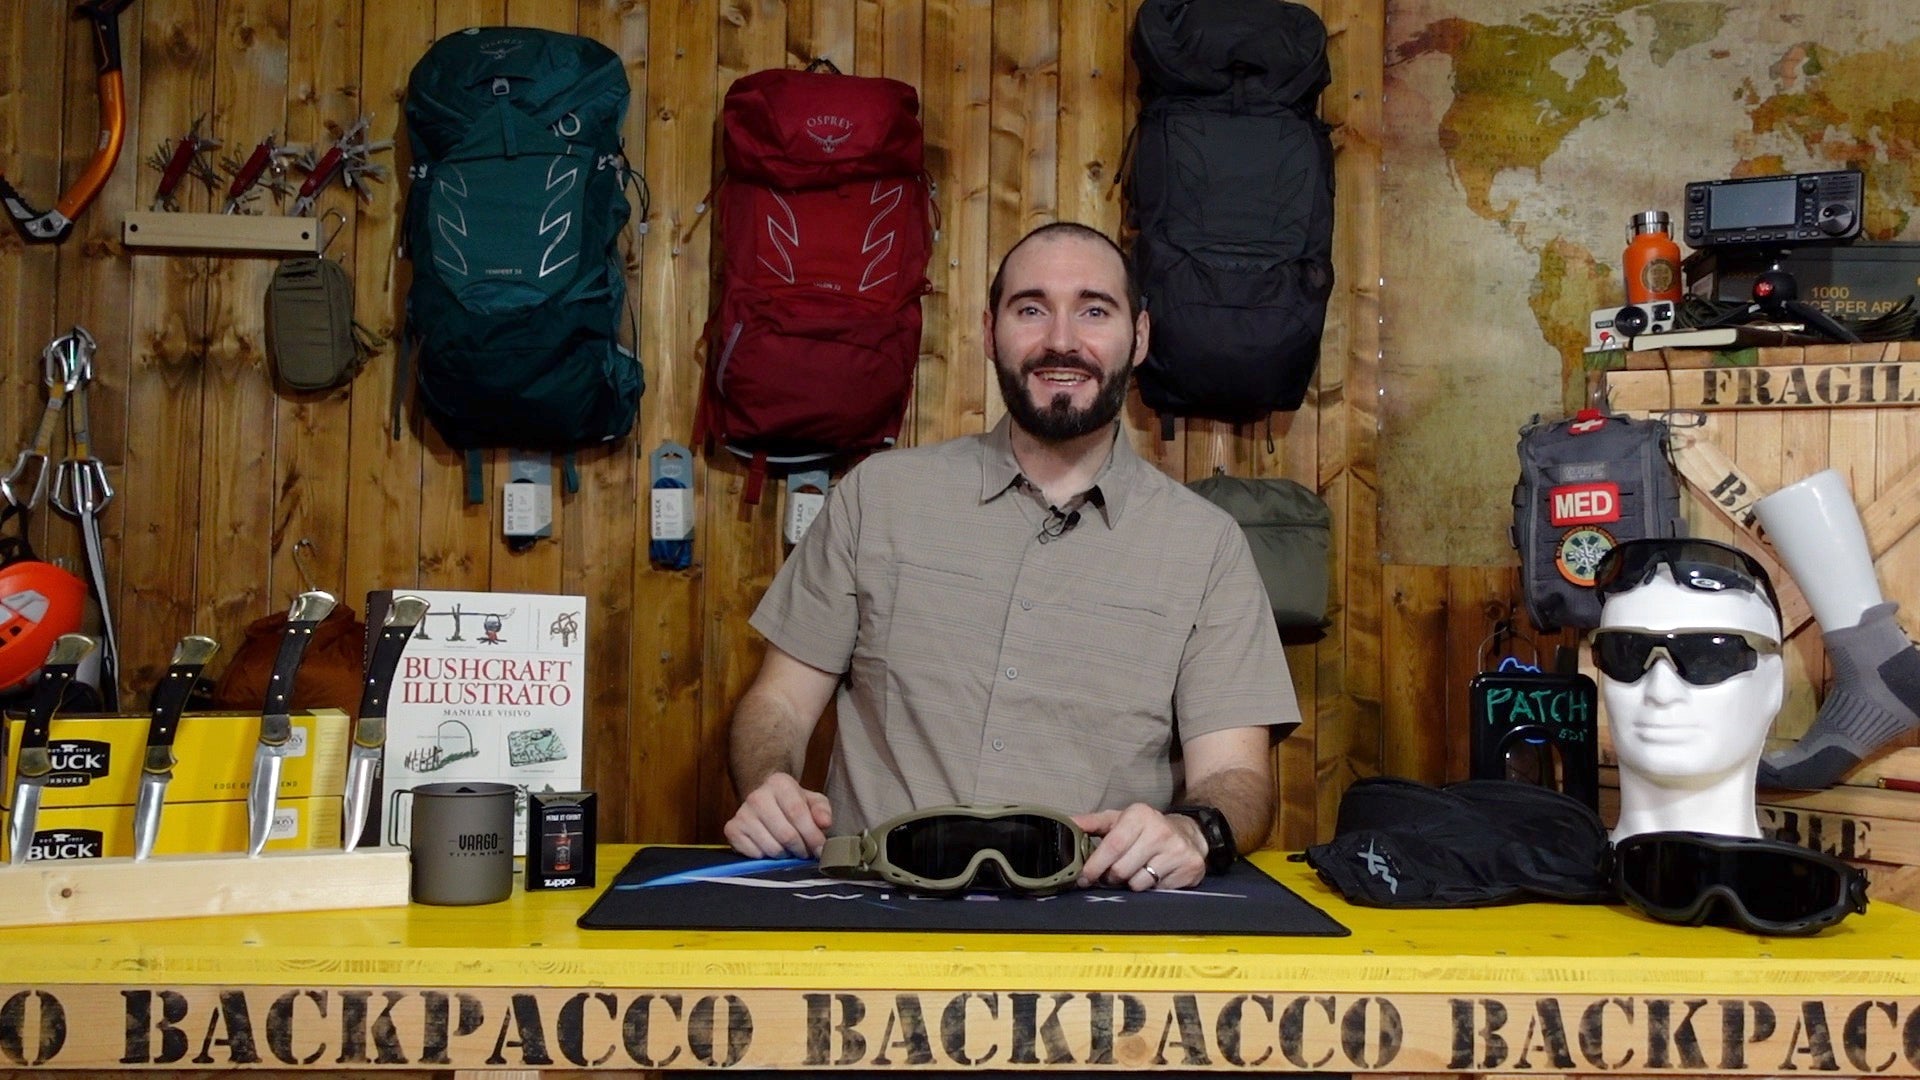 Paolo di backpacco spiega i WILEYX | SPEAR DUAL LENS 